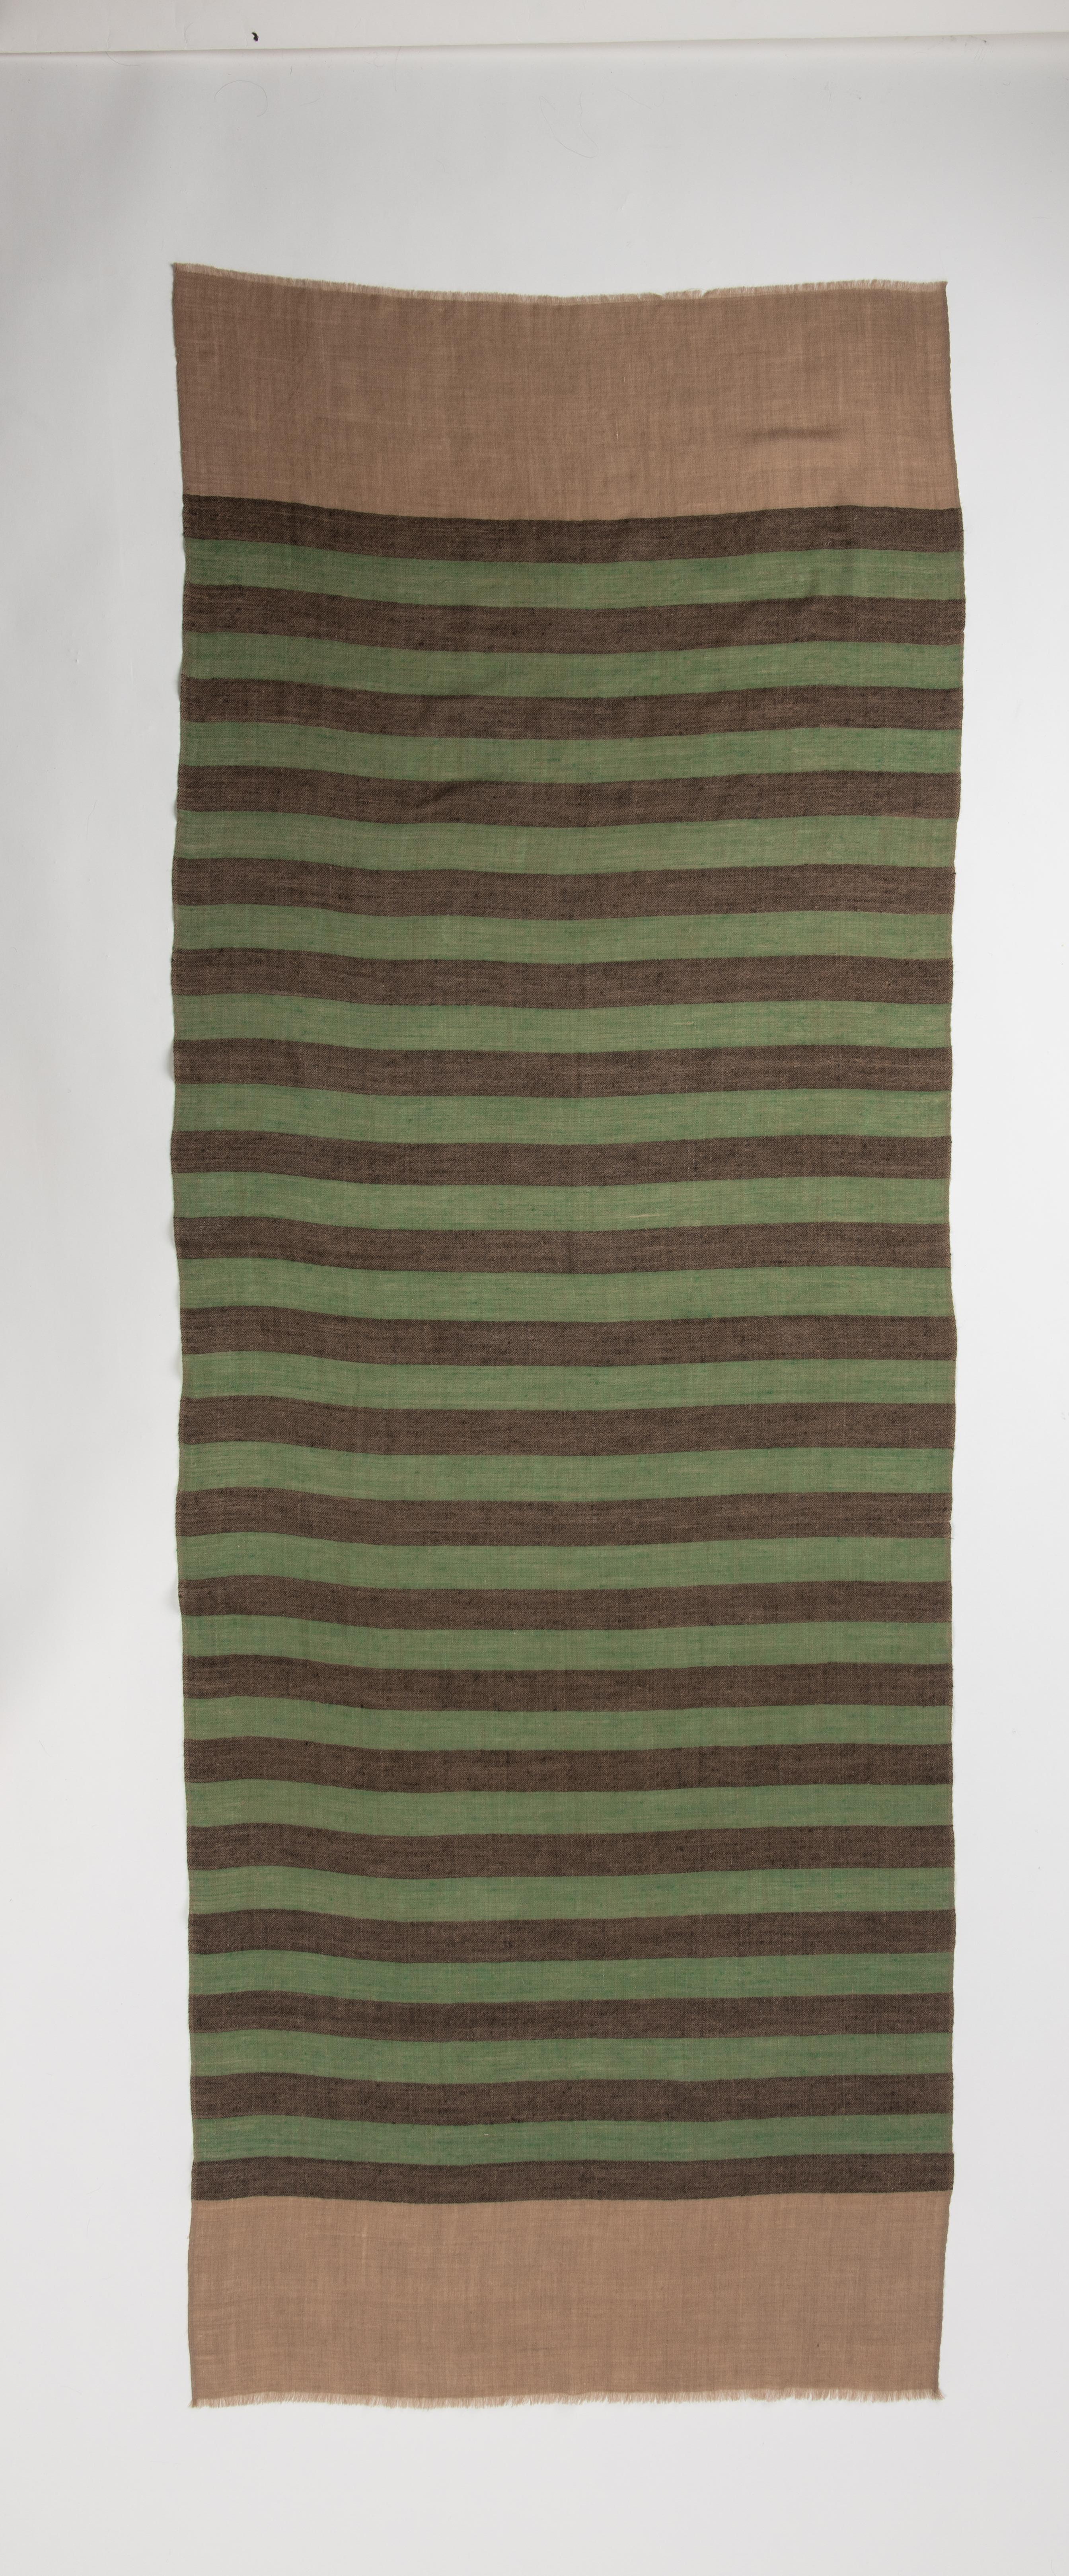 Gray Kashmiri Indian Handwoven Charcoal And Green Stripe 100% Cashmere Shawl For Sale